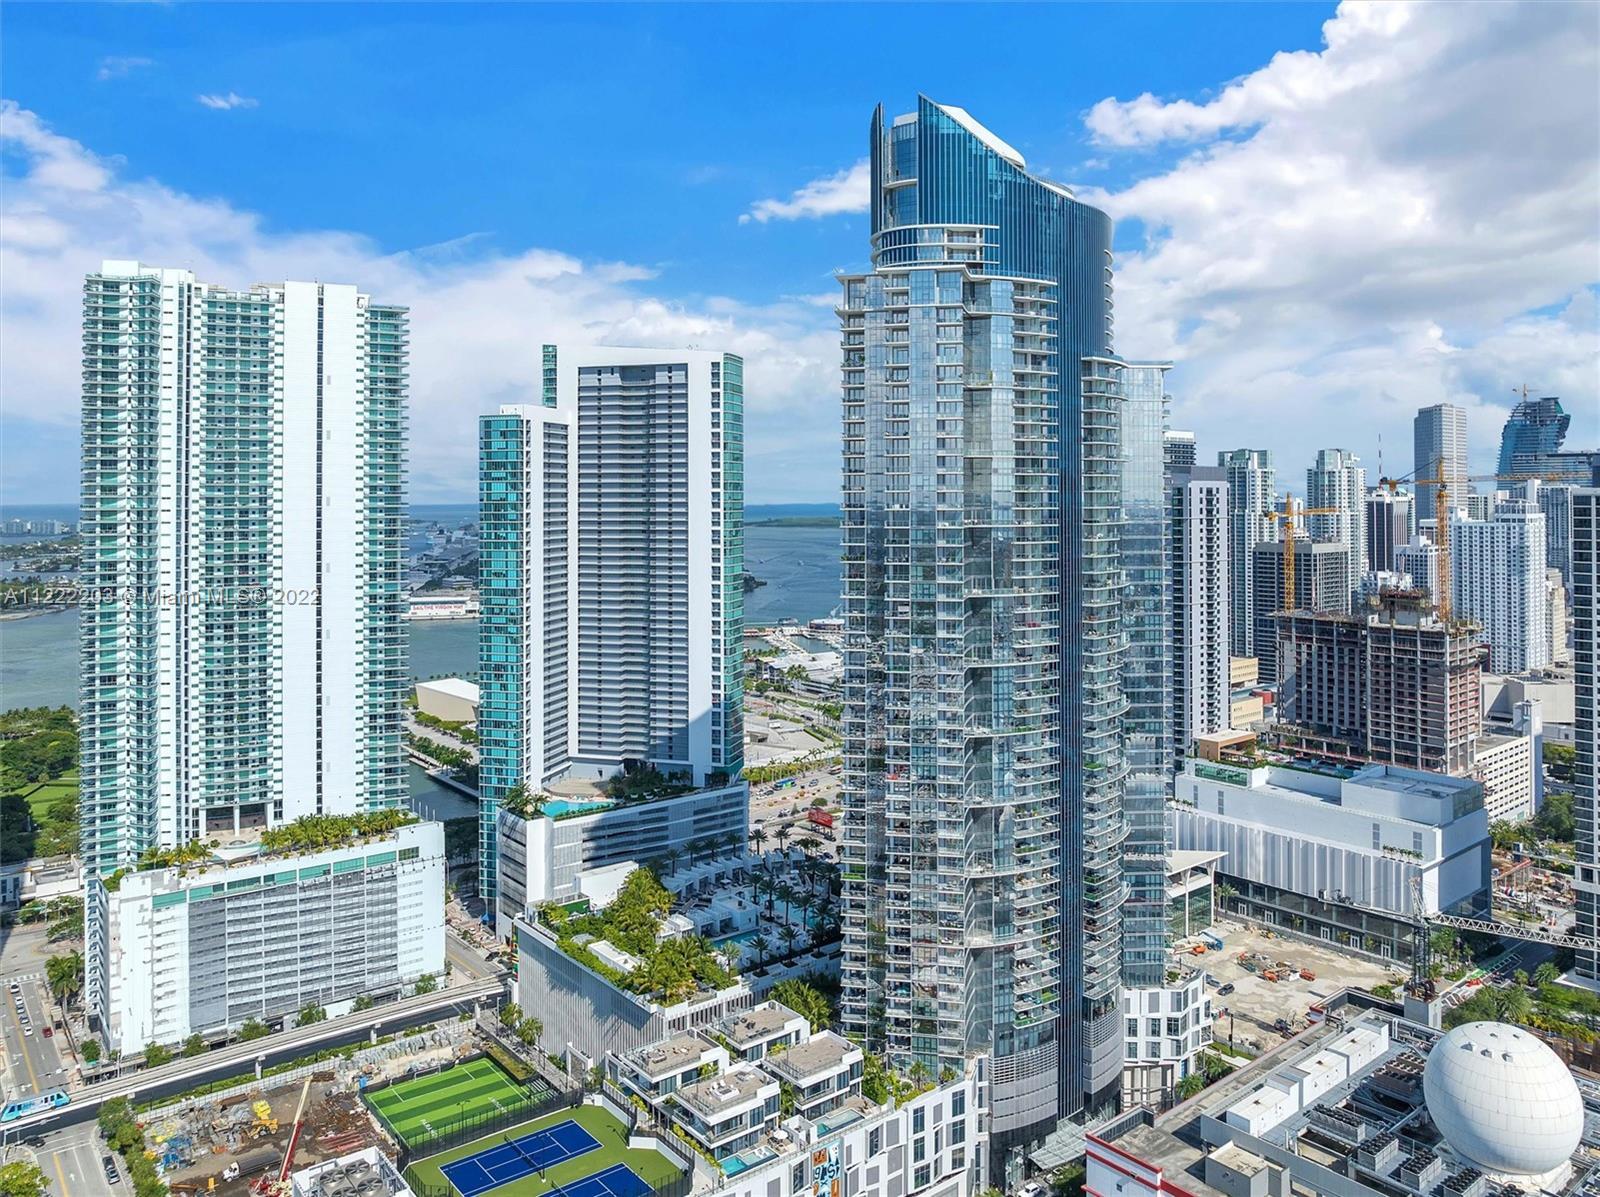 With the most amenities in the world, Paramount Miami Worldcenter offers an incredible urban experie